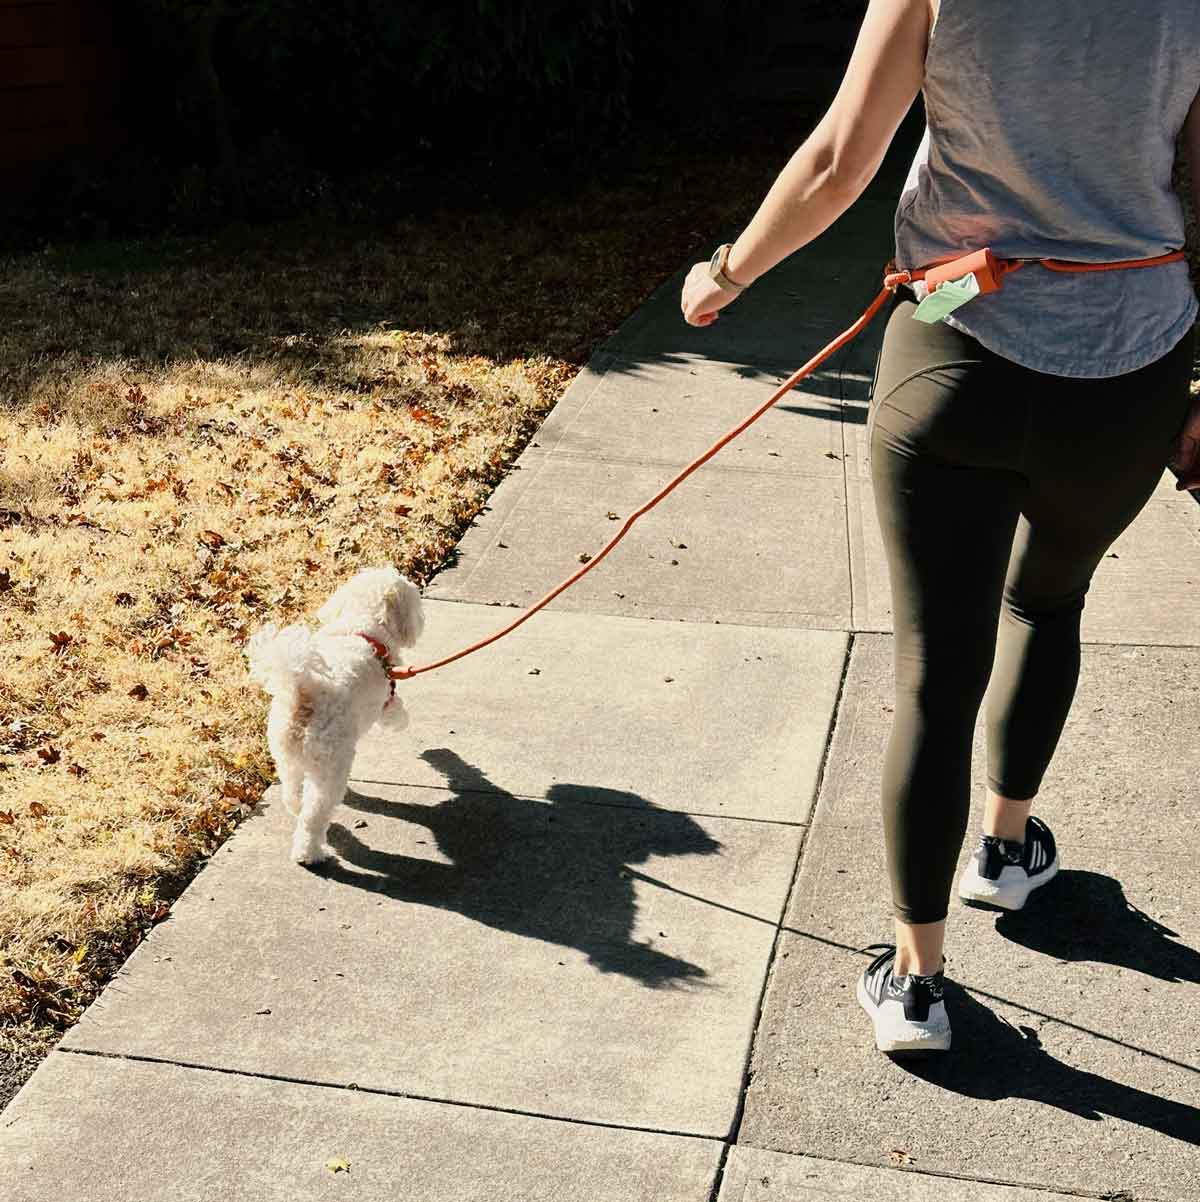 A white dog walks next to her owner, wearing a coral leash